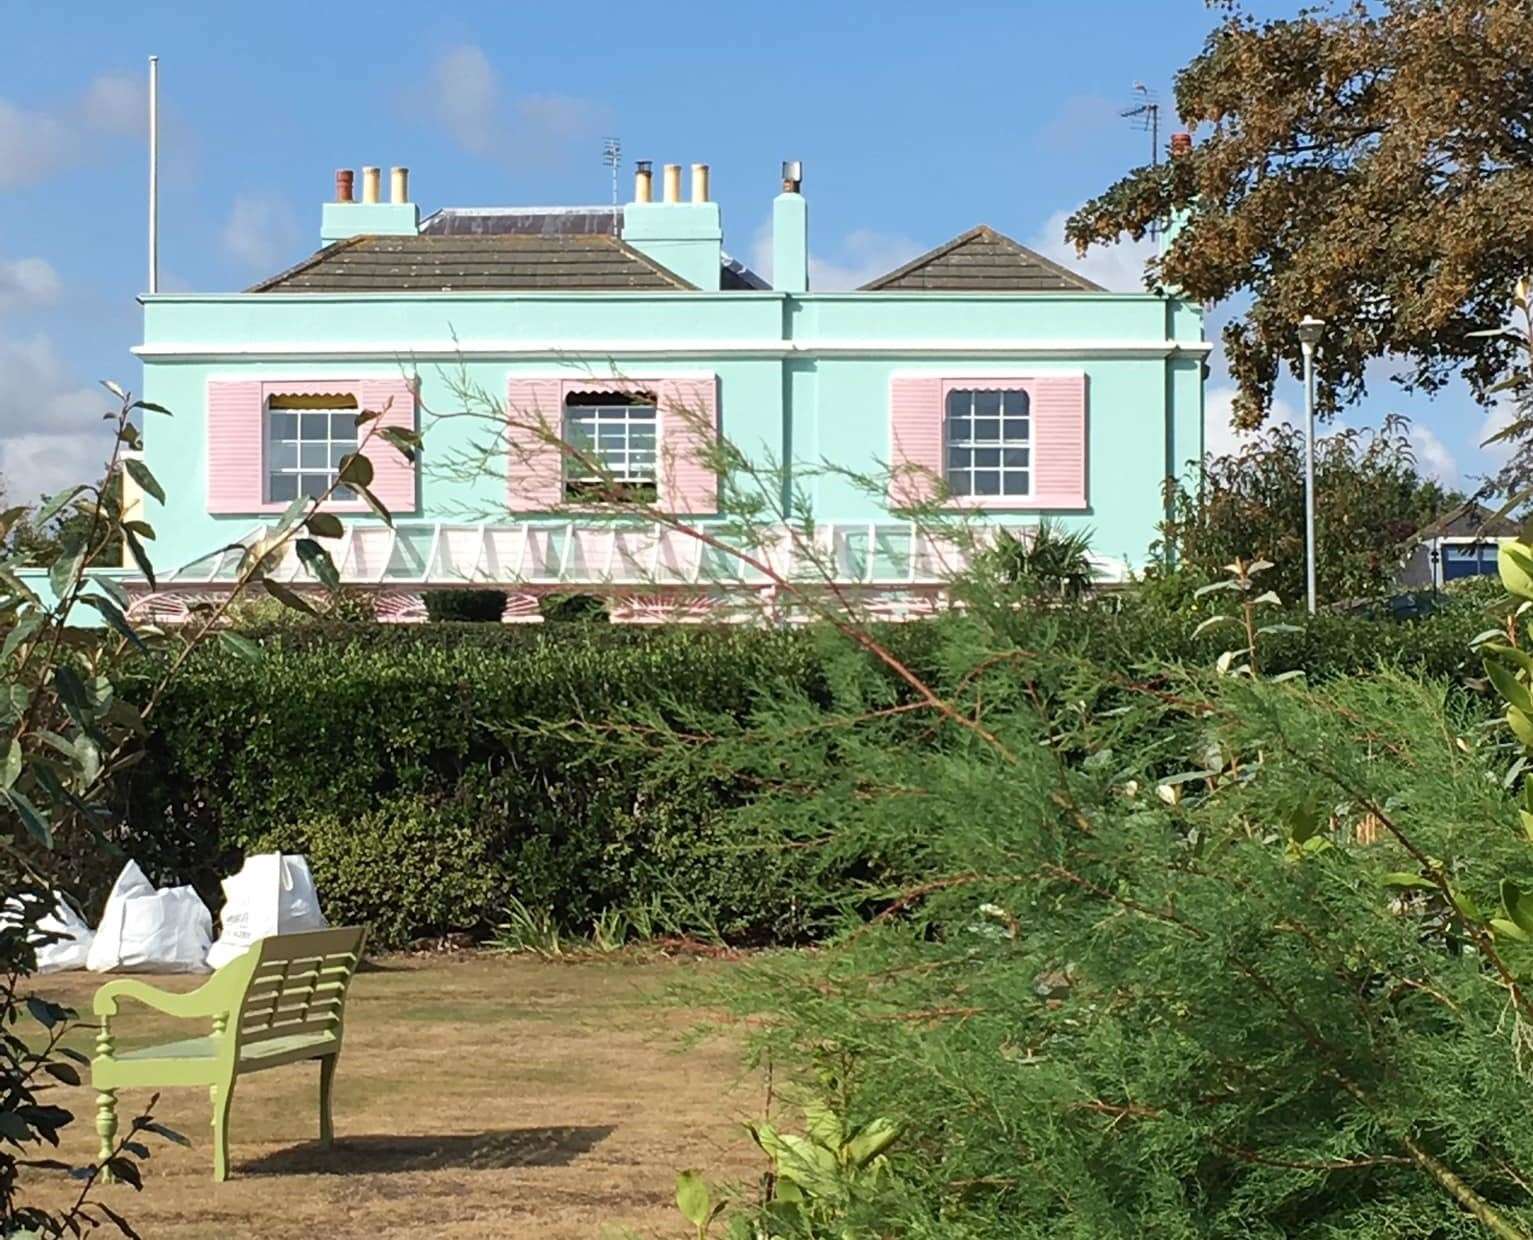 Producers have hired Coast House in Walmer for filming and painted the shutters pink Picture: Ann Priestland